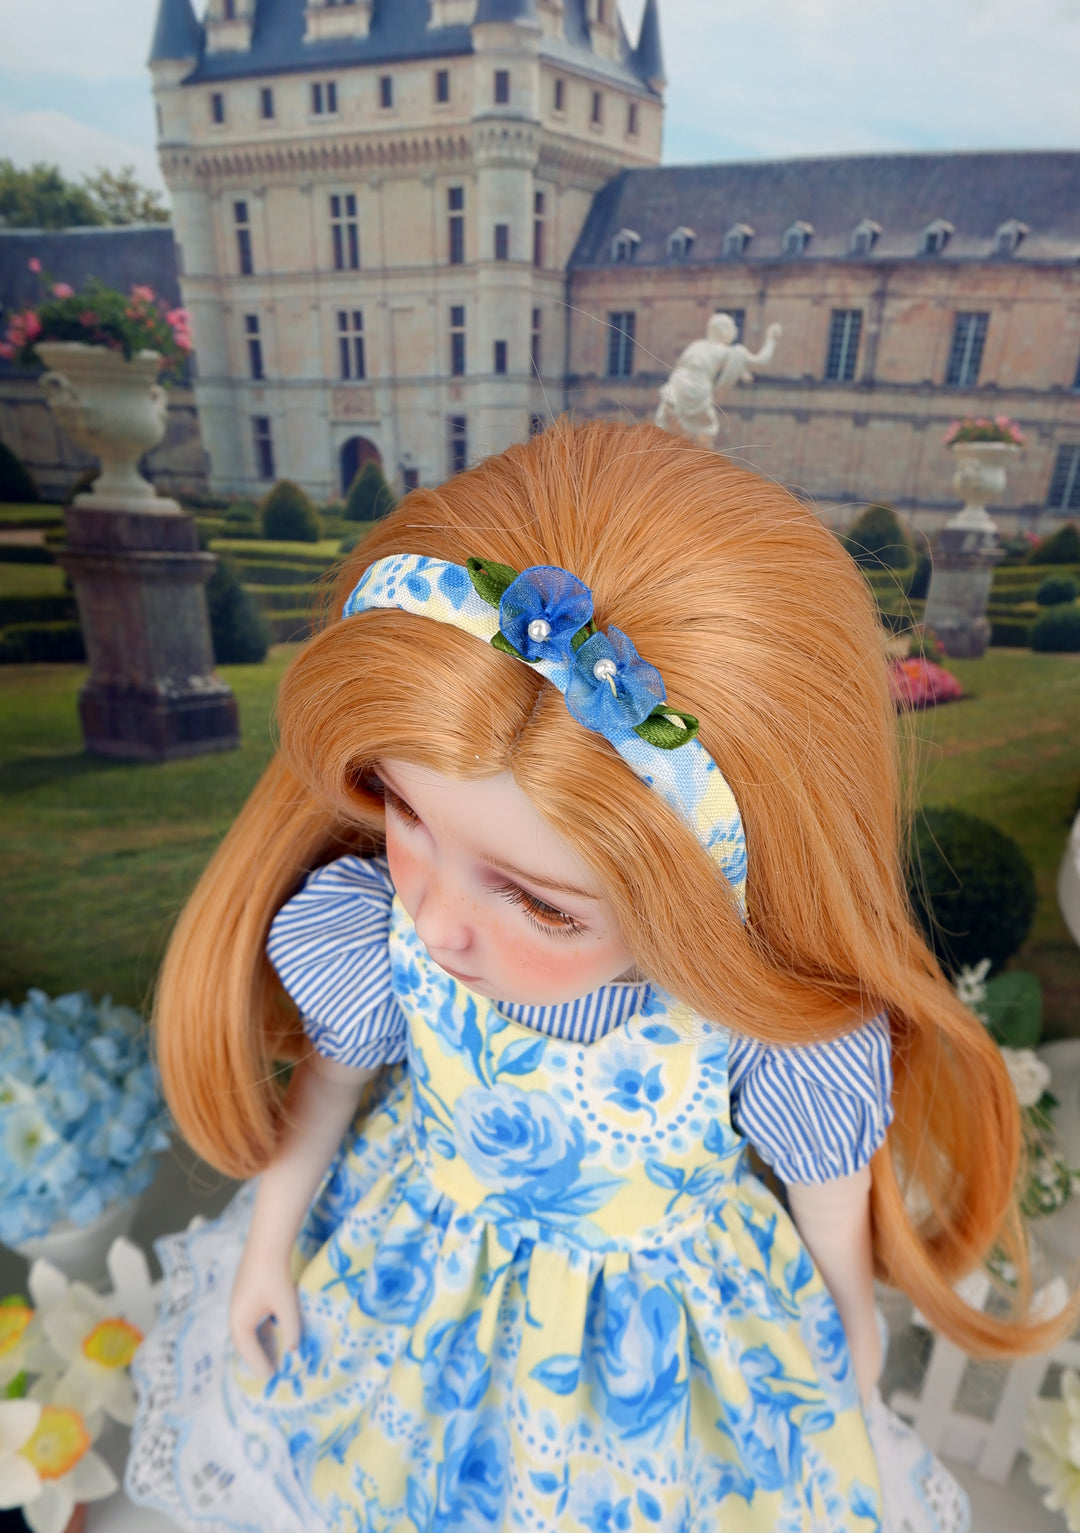 Blue China Rose - dress & pinafore with boots for Ruby Red Fashion Friends doll